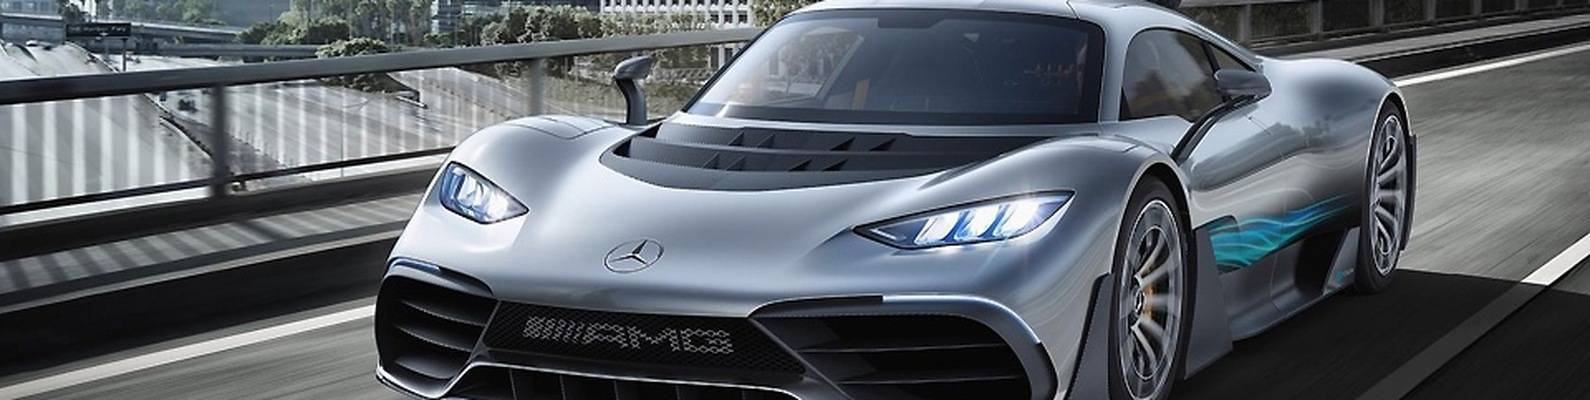 Mercedes-amg project one - вики